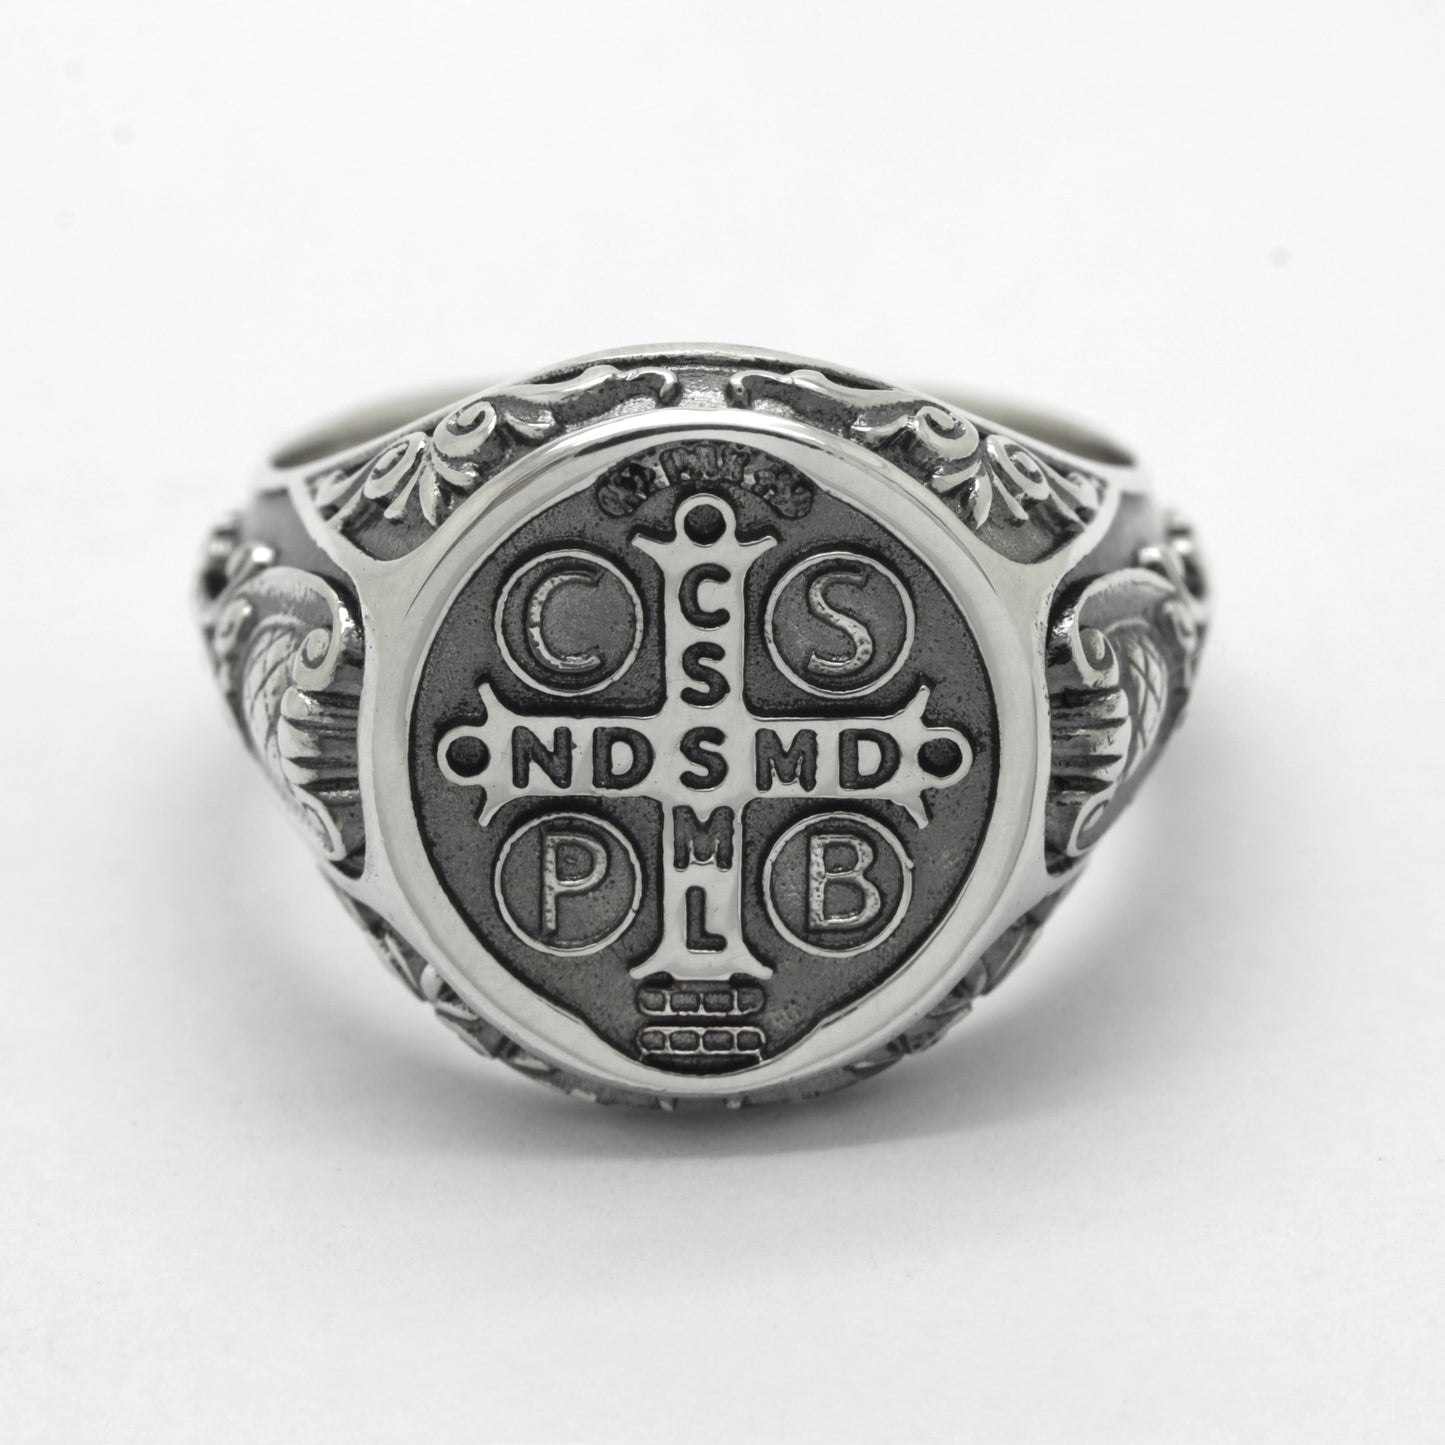 Saint Benedict Medal Exorcism Catholic Baroque Style Sterling Silver Signet Ring